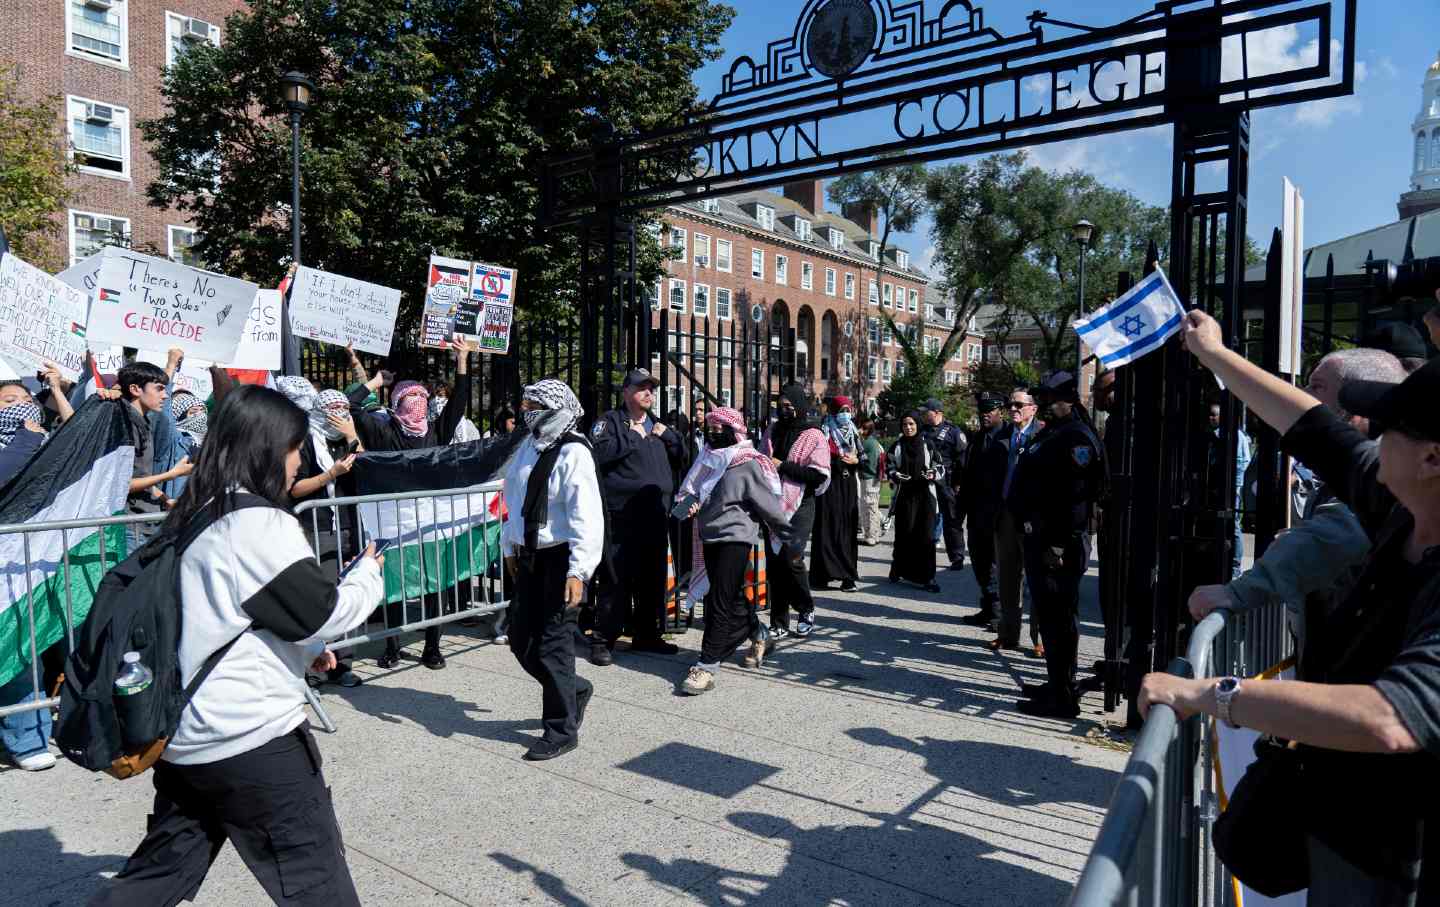 Protestors stand behind barricades at the gates of Brooklyn College